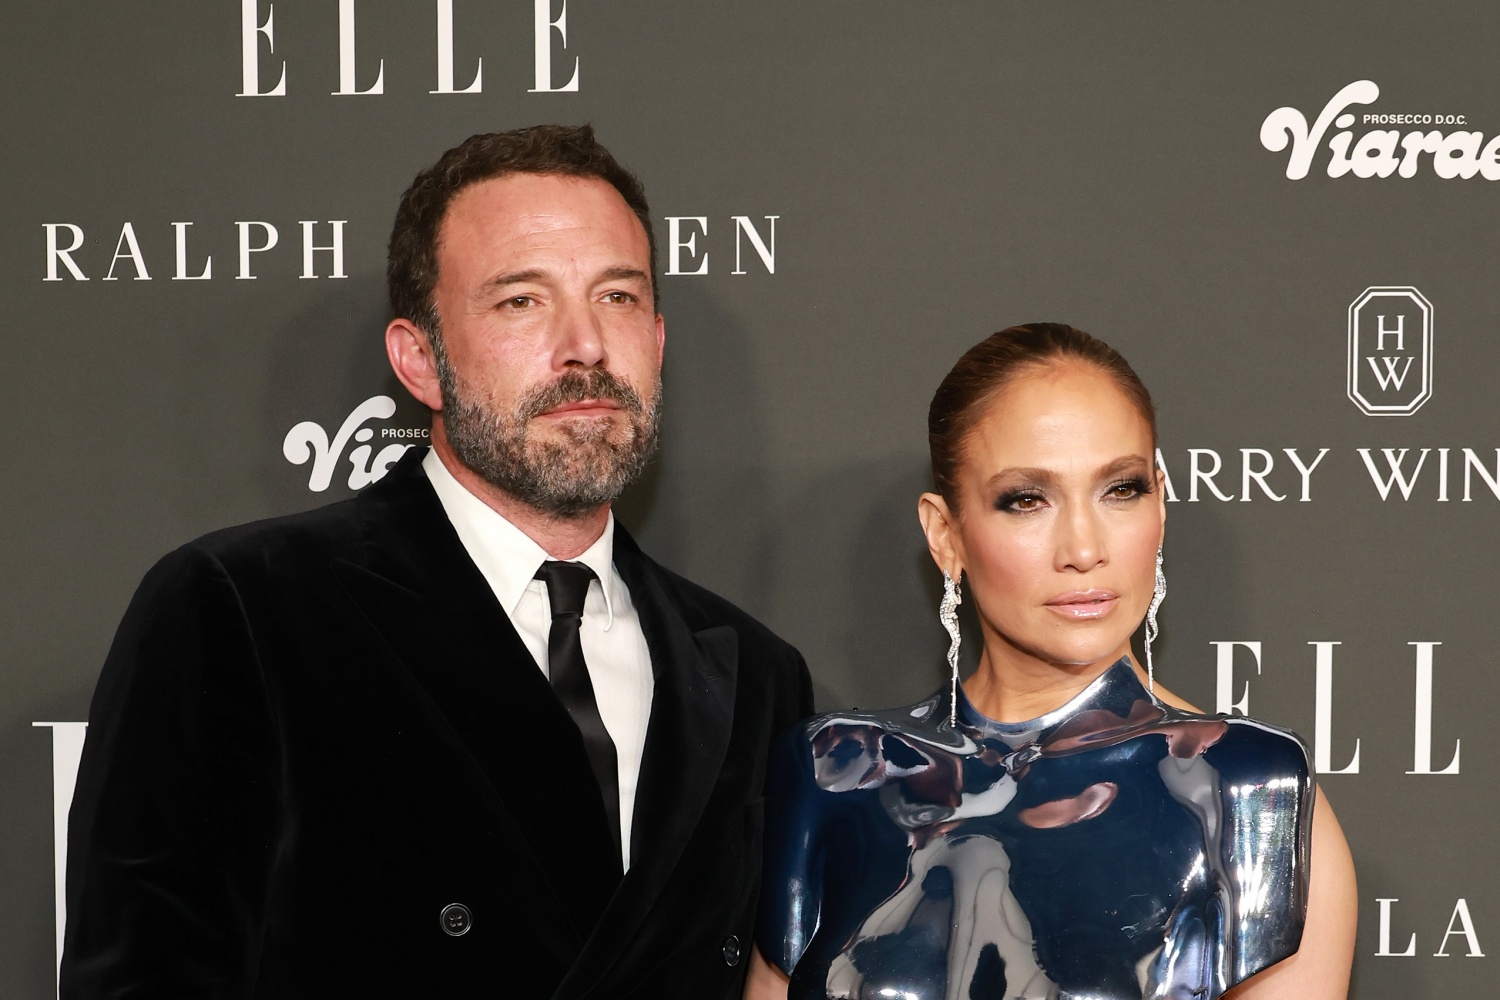 Jennifer Lopez and Ben Affleck’s marriage is not doomed after expert spots sign: ‘There’s a change’